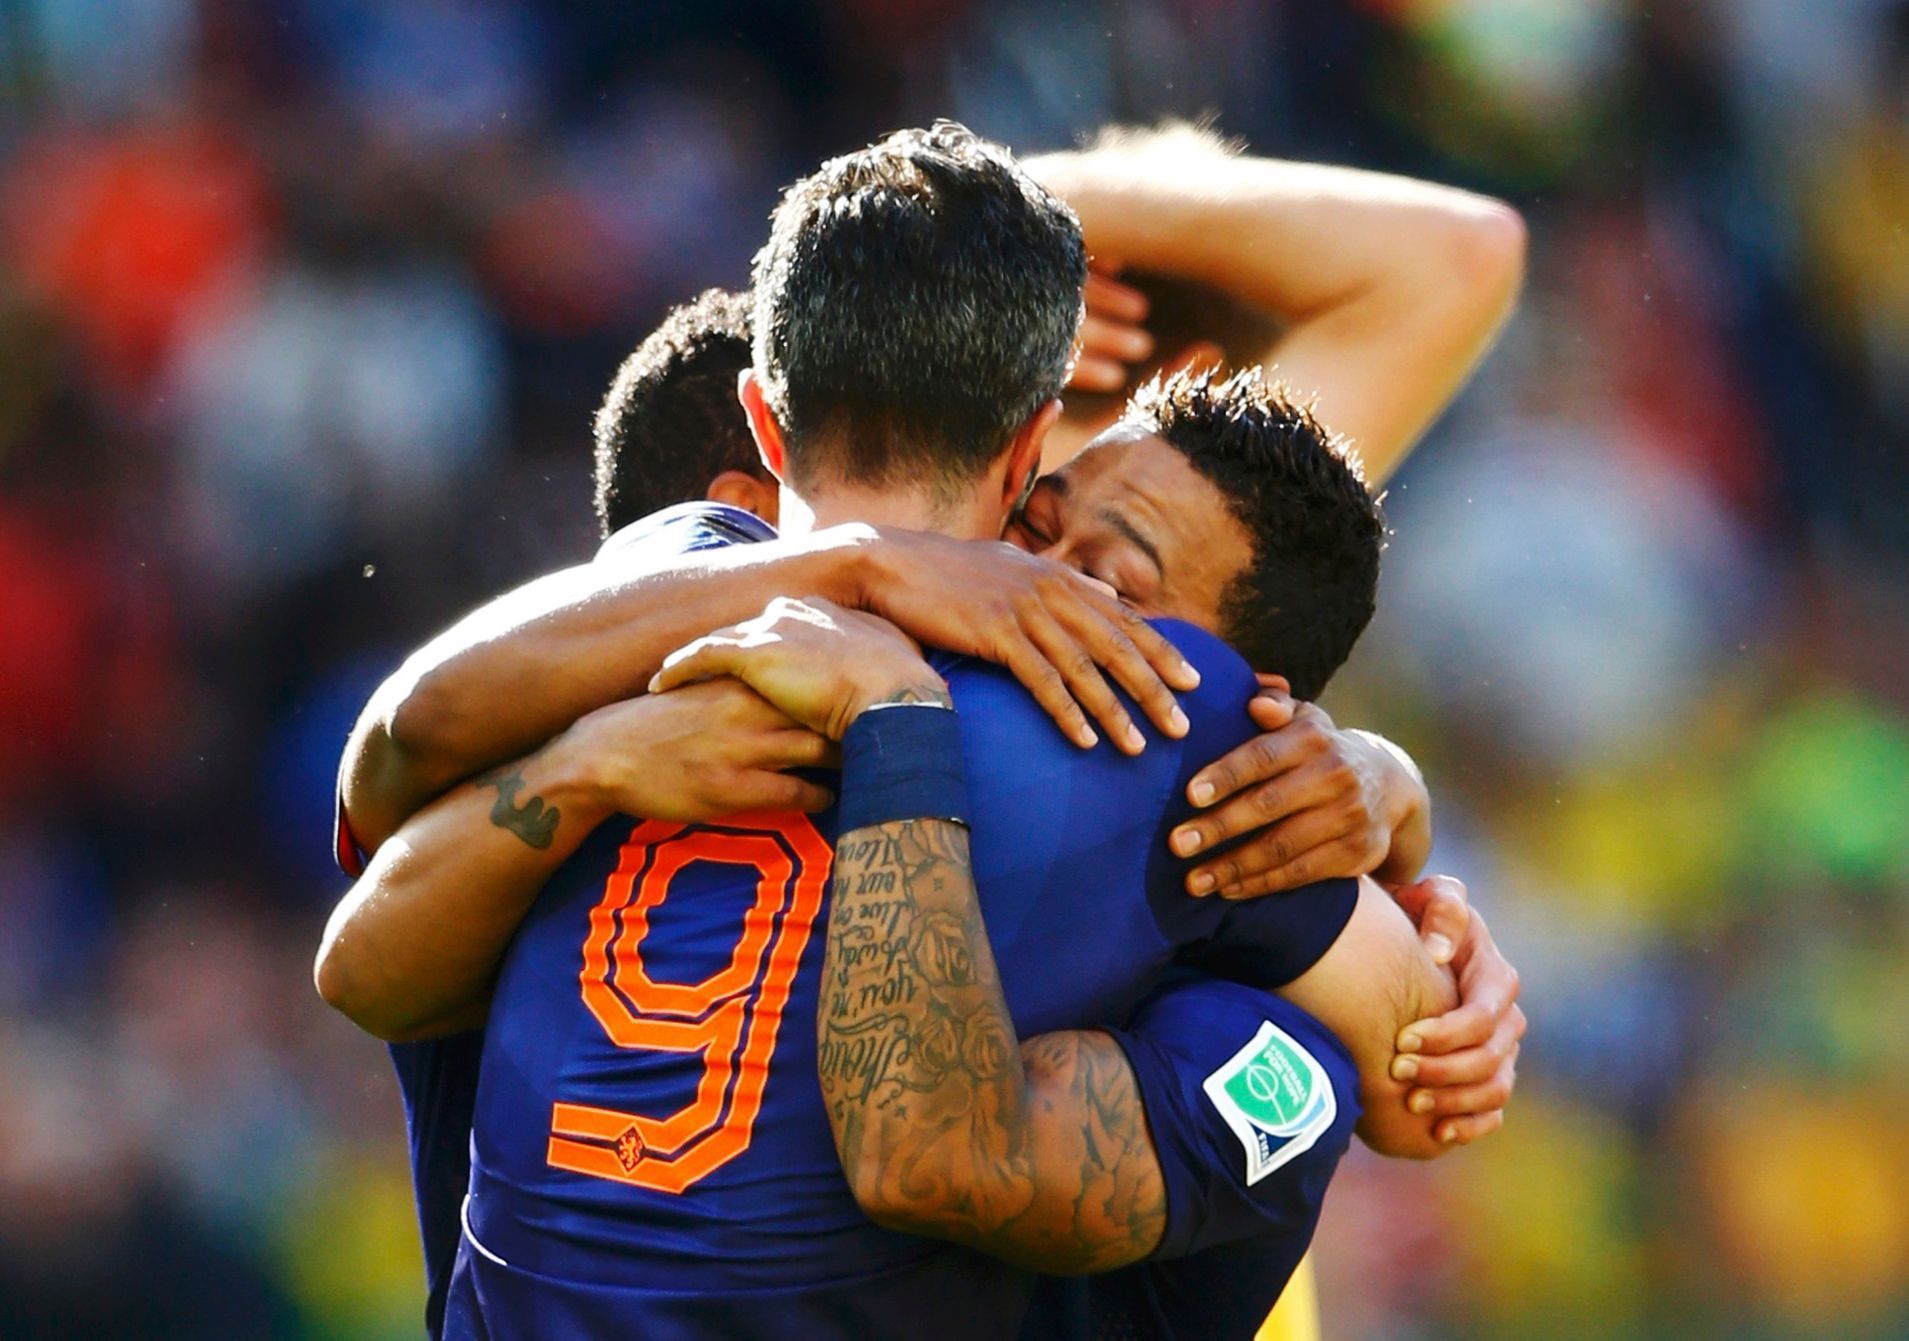 Depay of the Netherlands celebrates after scoring his team's third goal against Australia with van Persie of the Netherlands during their 2014 World Cup Group B soccer match at the Beira Rio stadium i